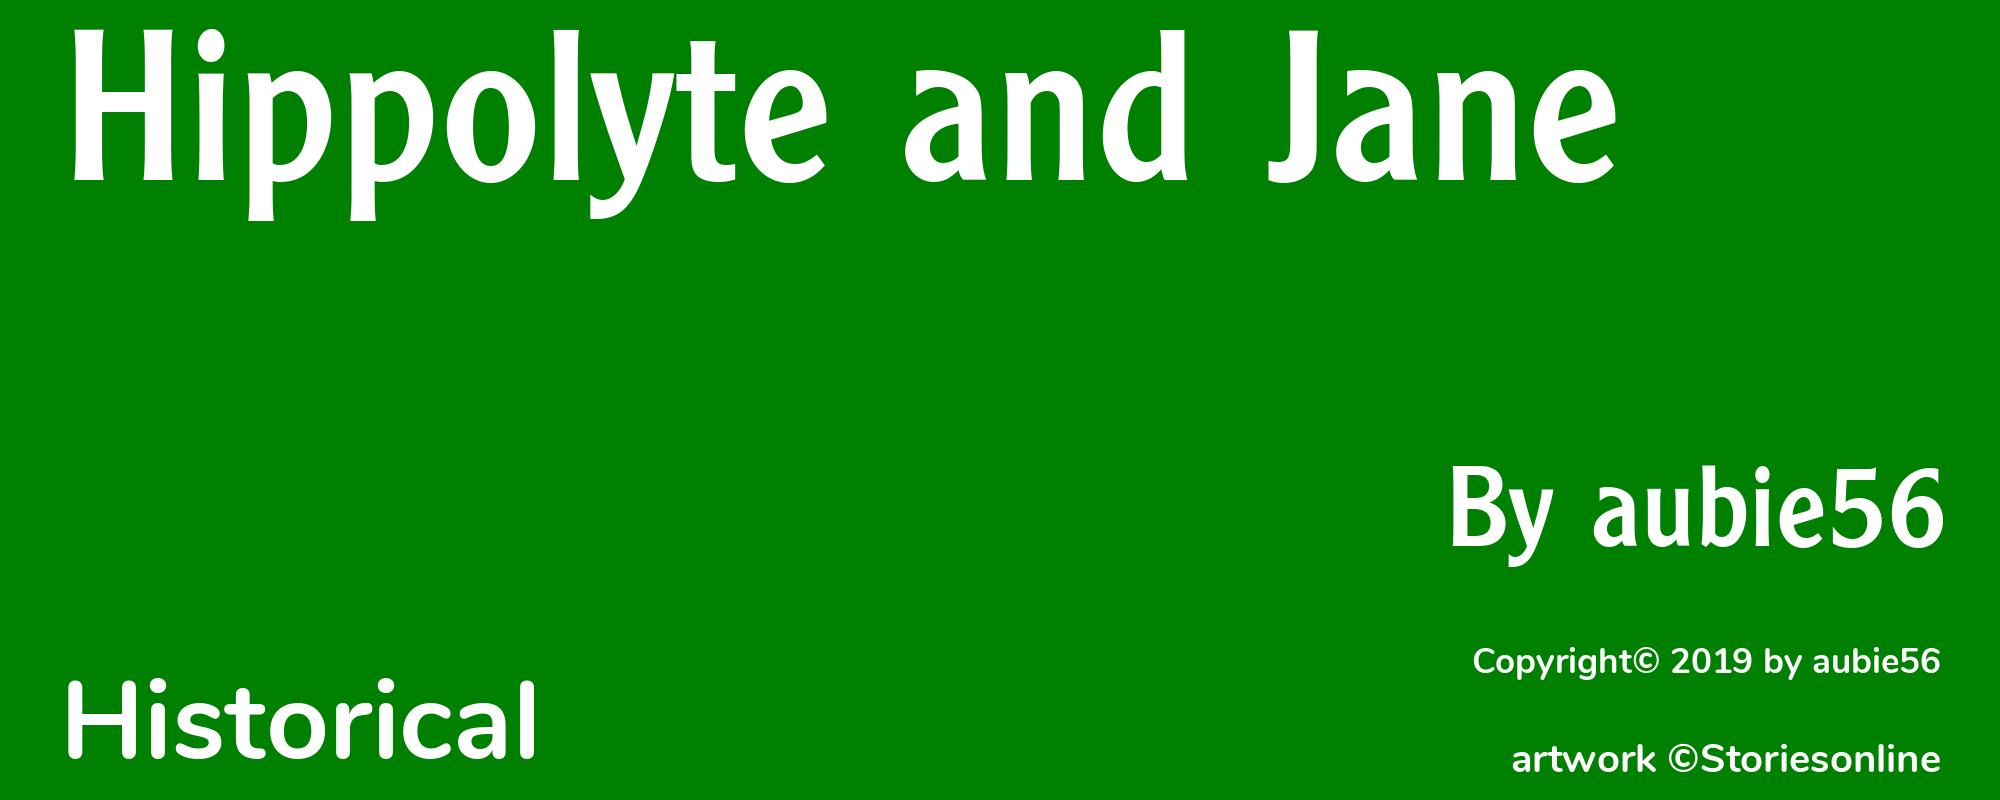 Hippolyte and Jane - Cover